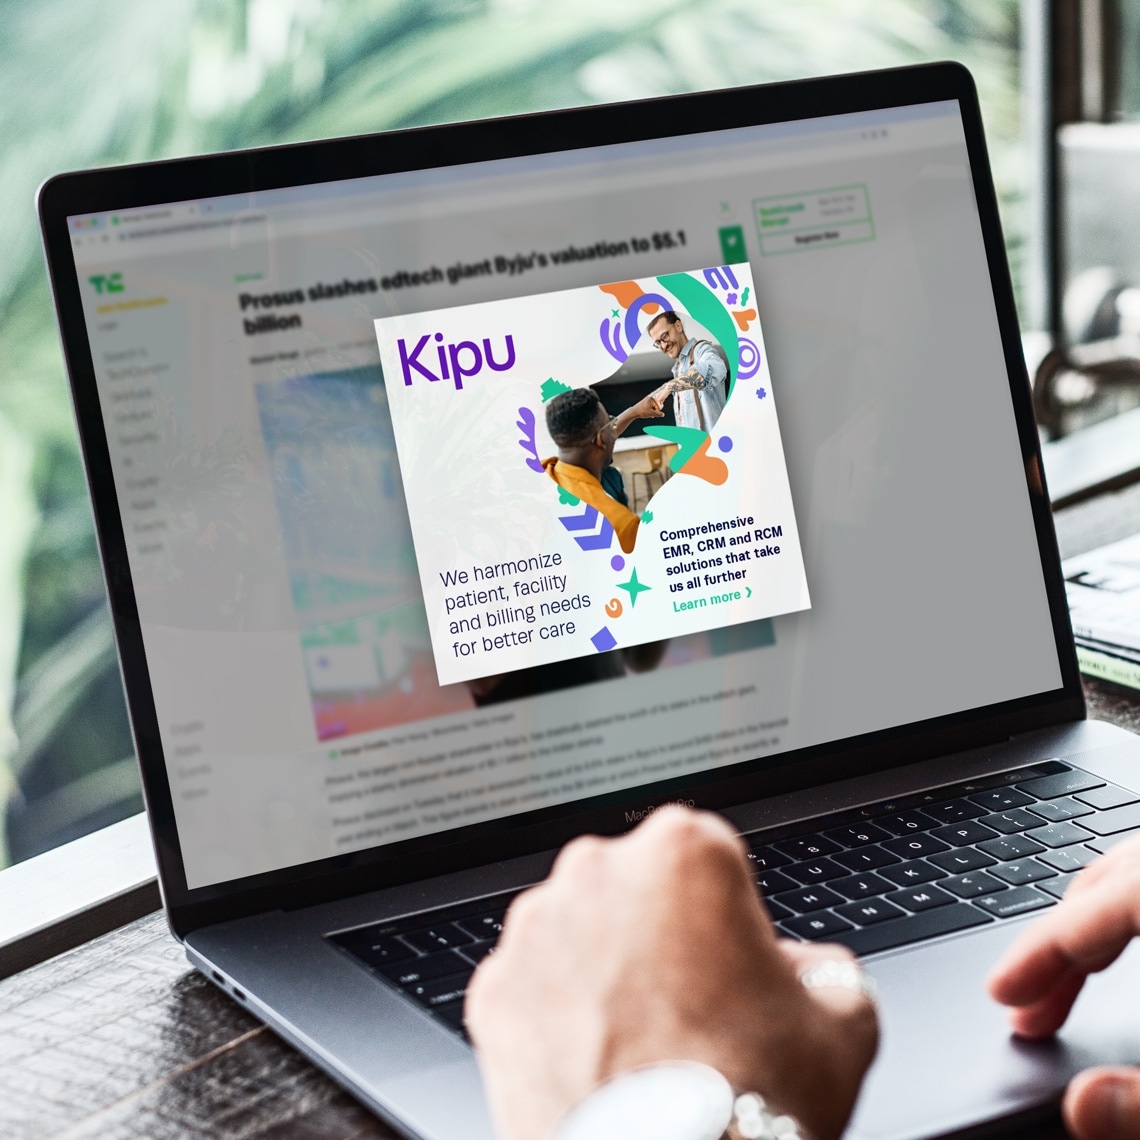 Example of a digital add developed for Kipu